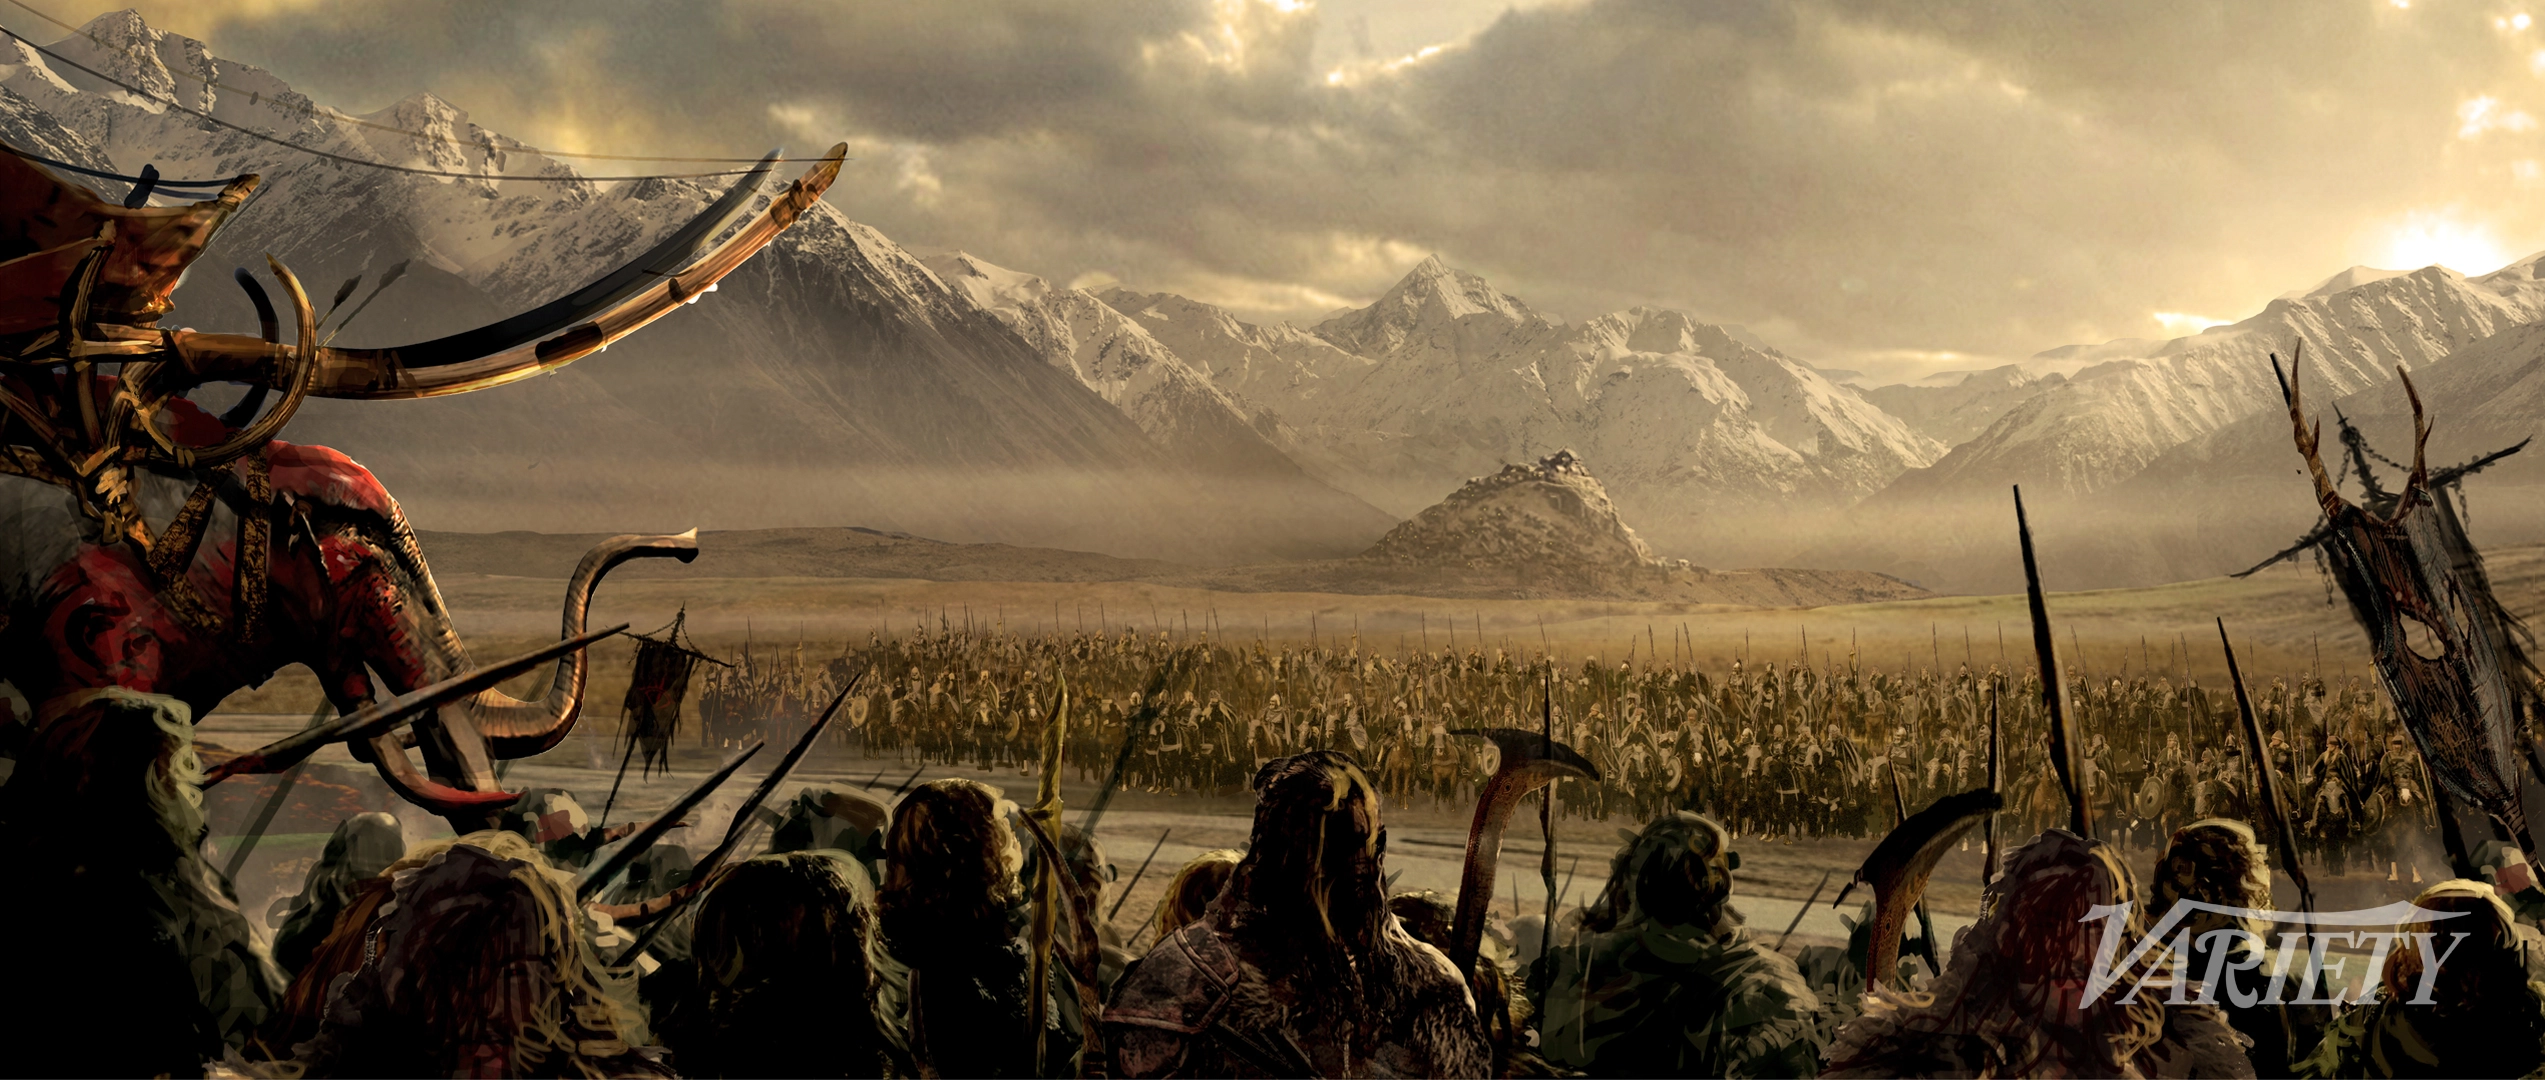 WB producer re-confirms Kenji Kamiyama’s The War of the Rohirrim will be made in 2D